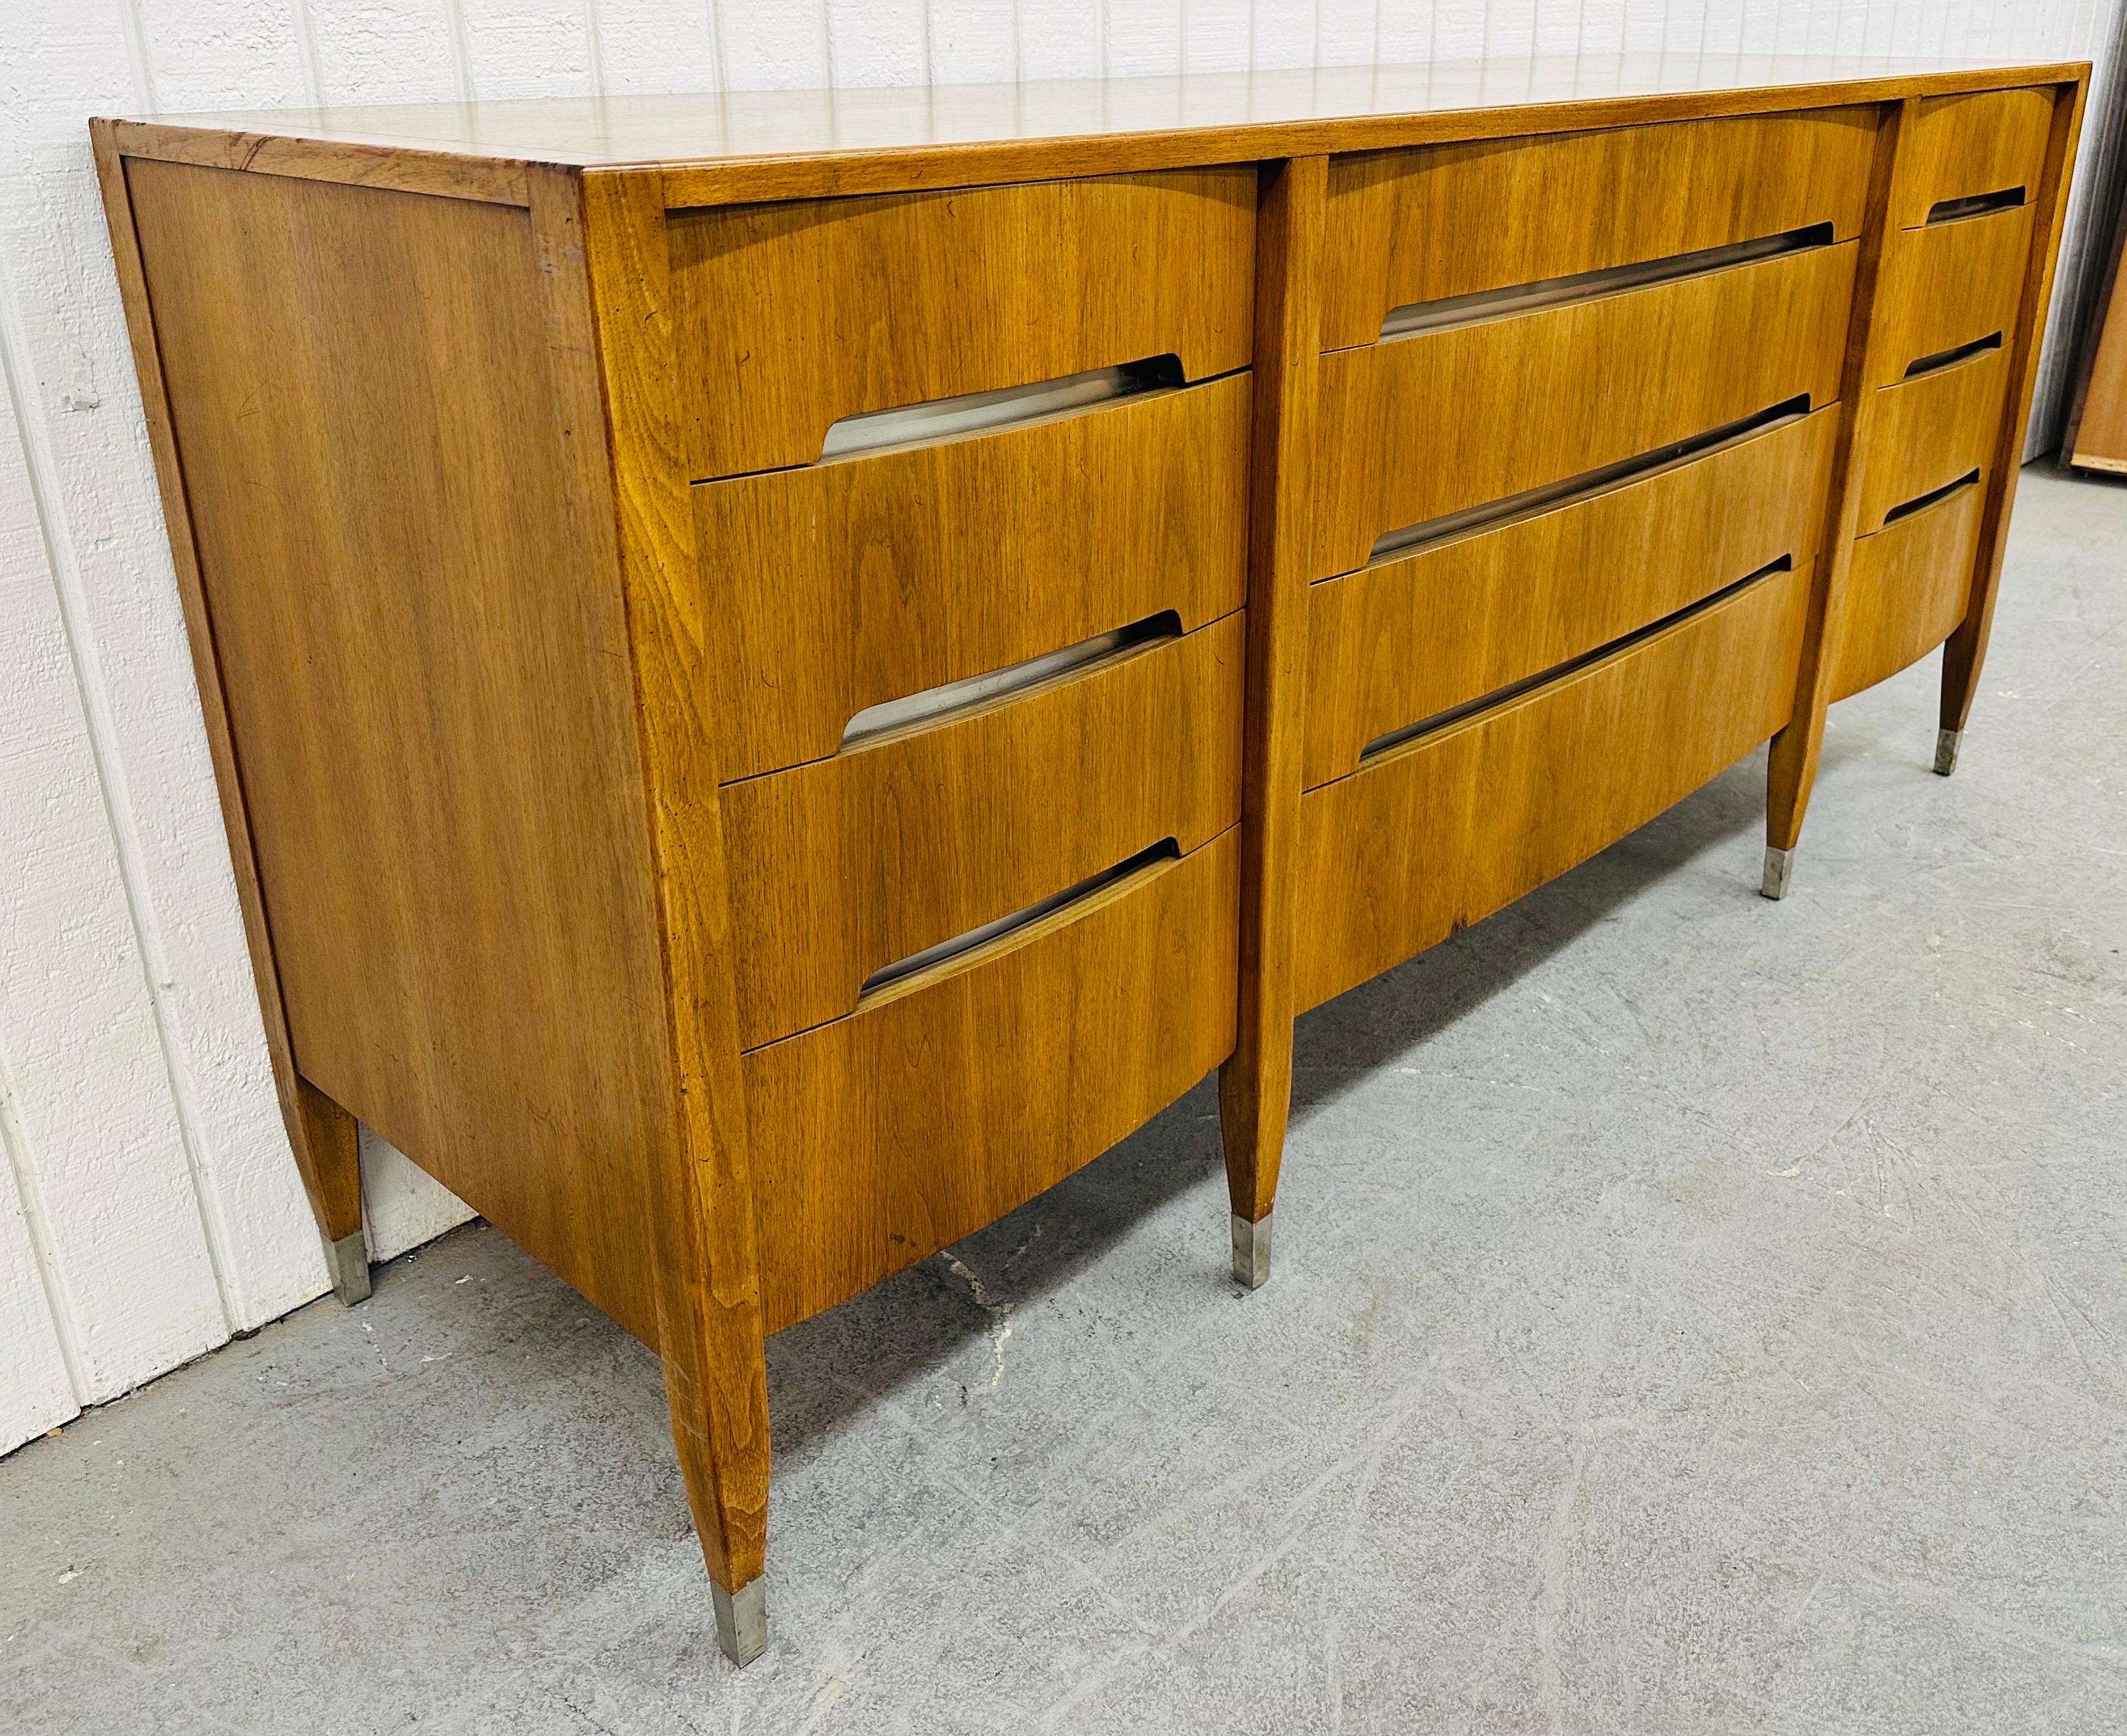 This listing is for a Mid-Century Modern Sligh Walnut 12-Drawer Dresser. Featuring a straight line design, twelve drawers for storage, recessed handles, chrome trim with caps on the feet, and a beautiful walnut finish. This is an exceptional